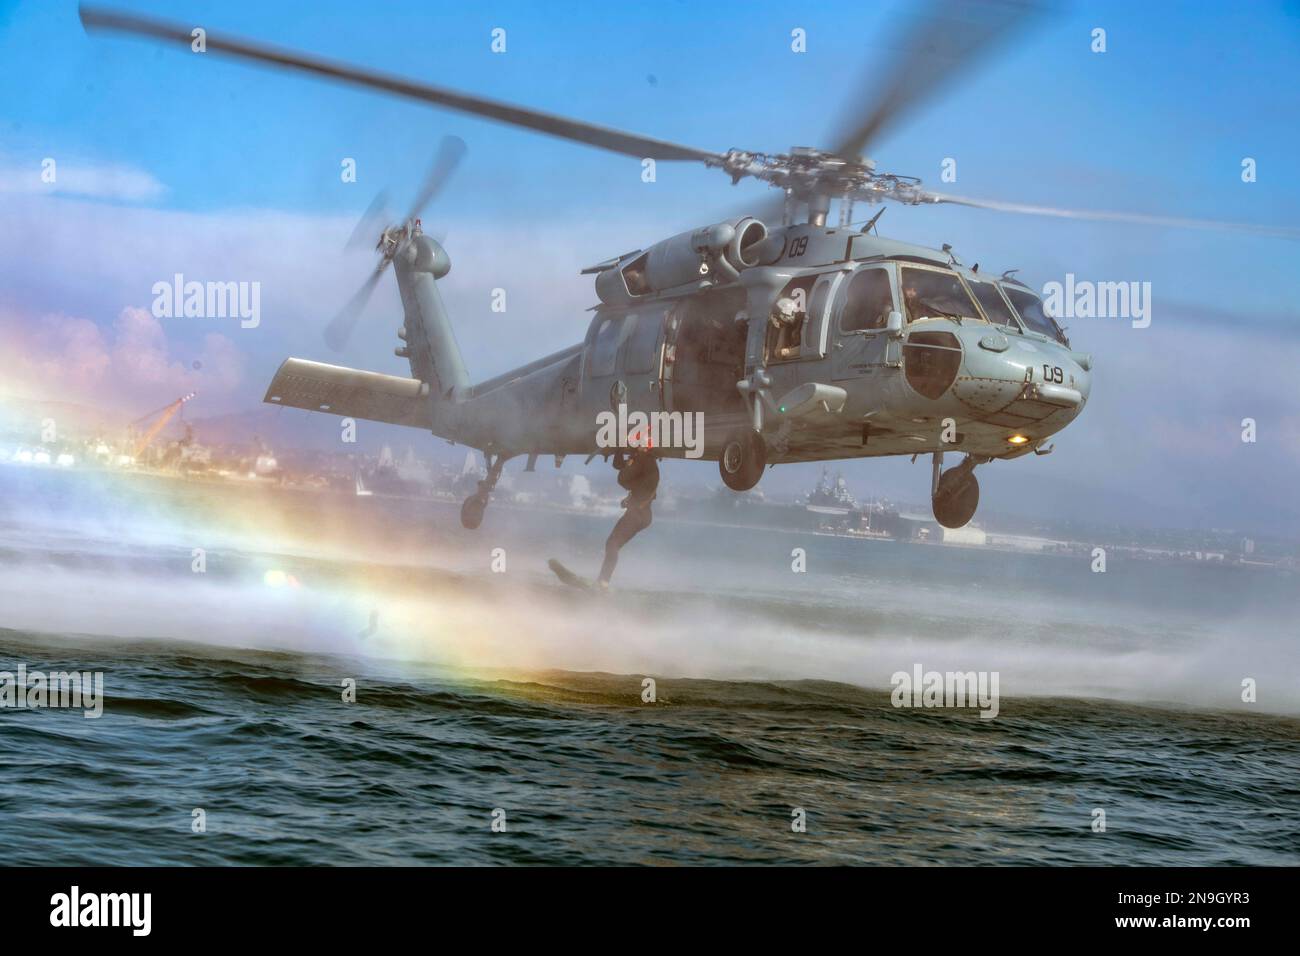 A US Naval Aircewman (Helicopter), jumps from MH-60S helicopter during exercise Stock Photo